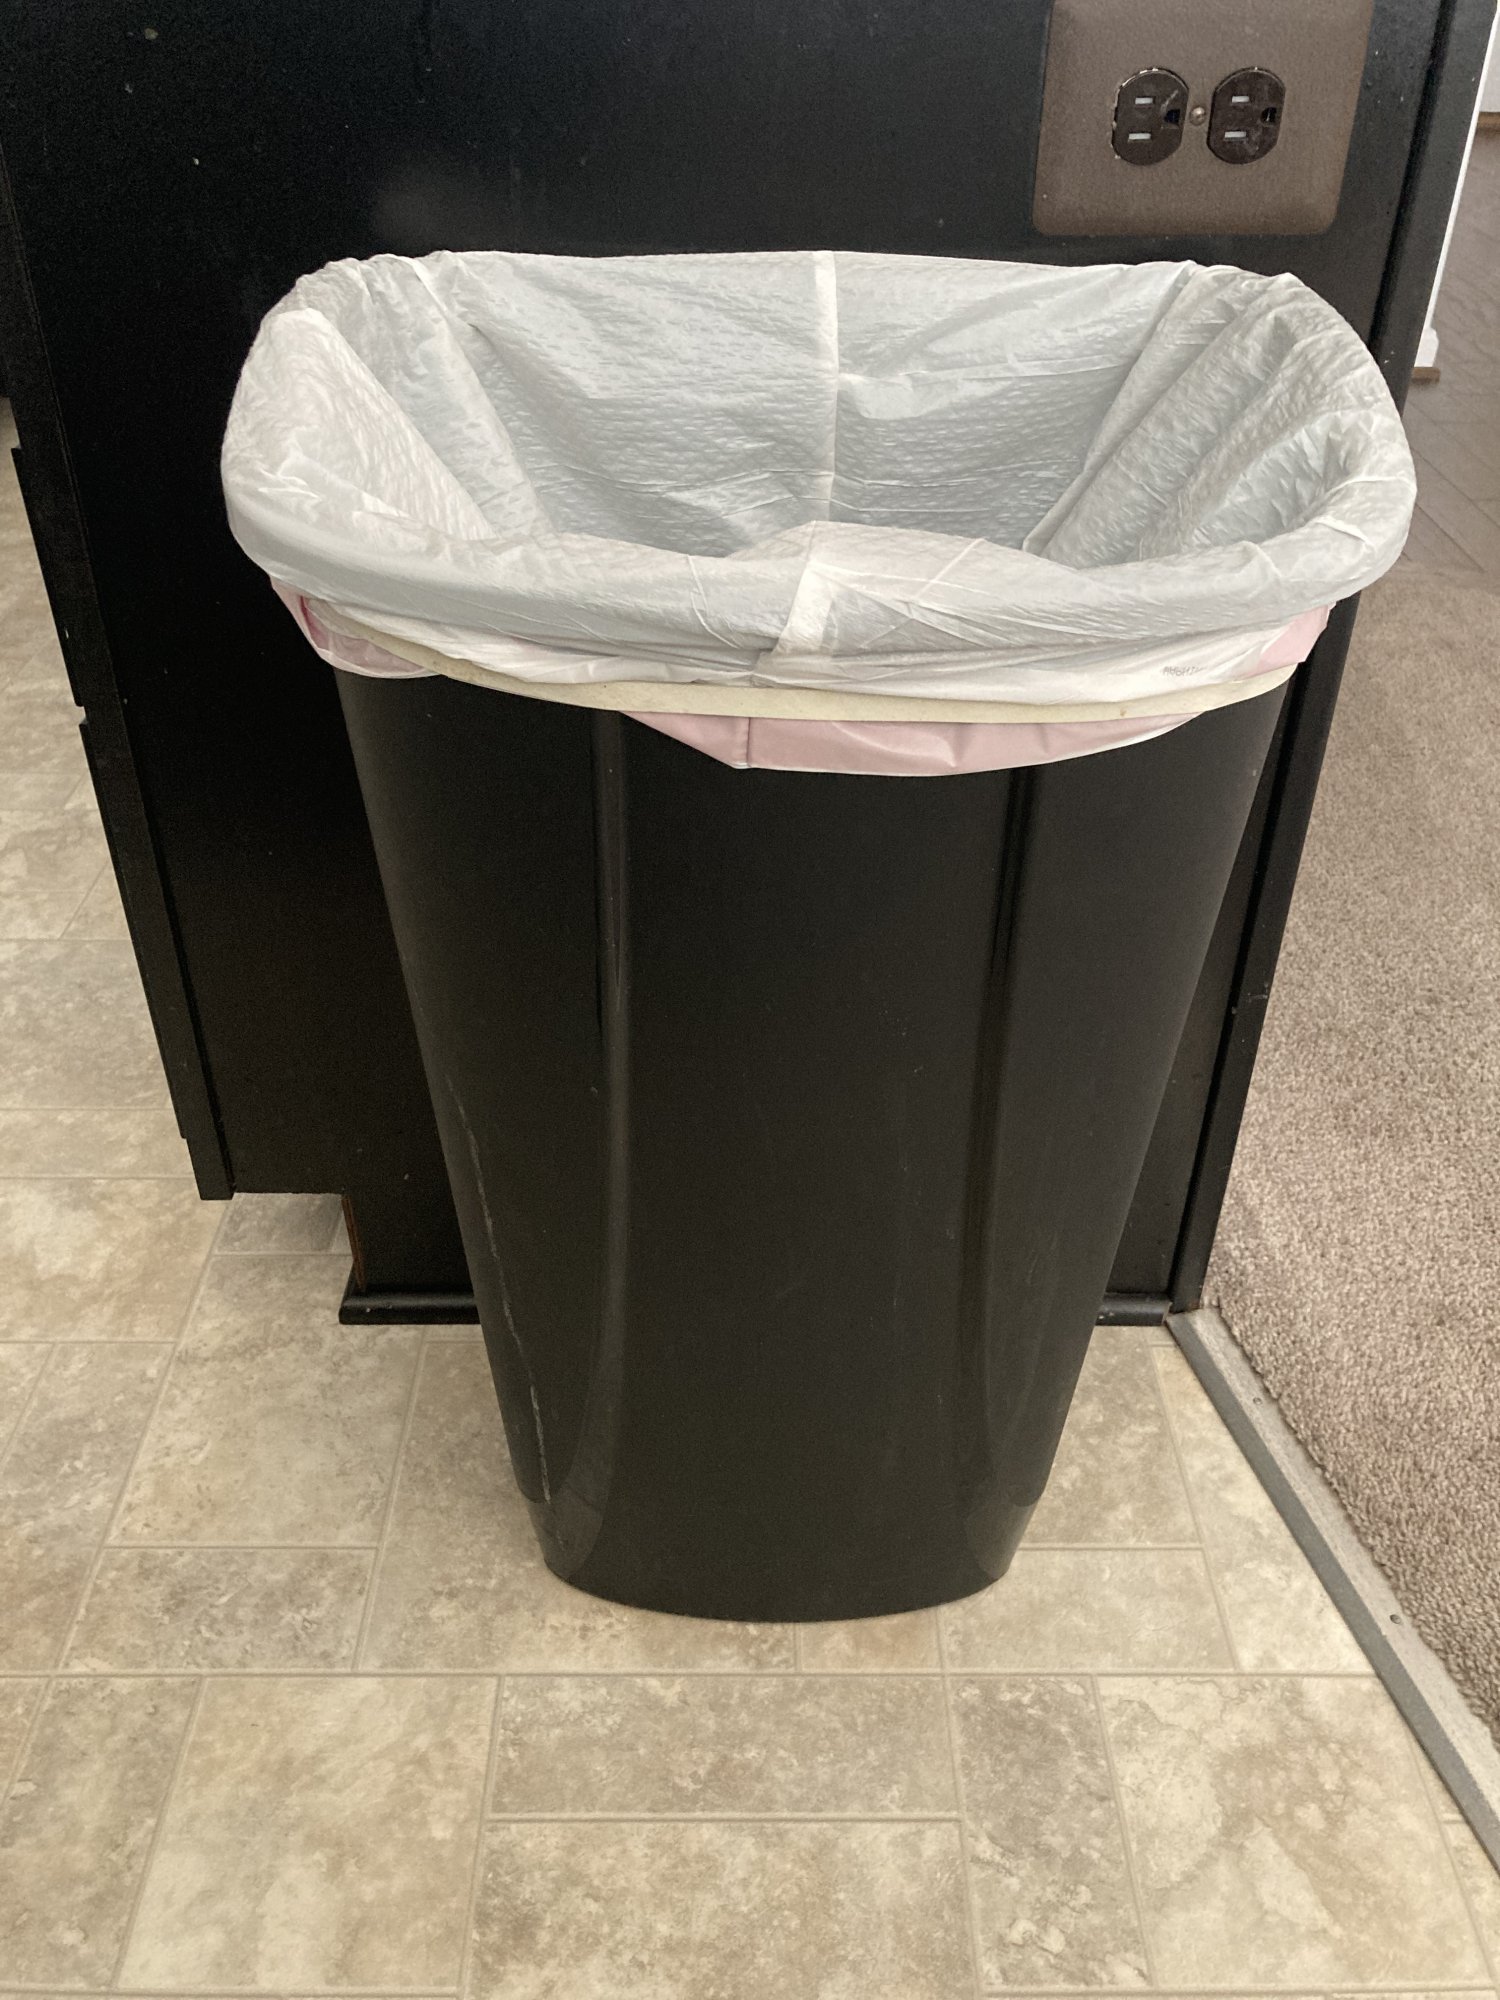 Super Random But… What is the BEST Trash Bin for a Standard 13